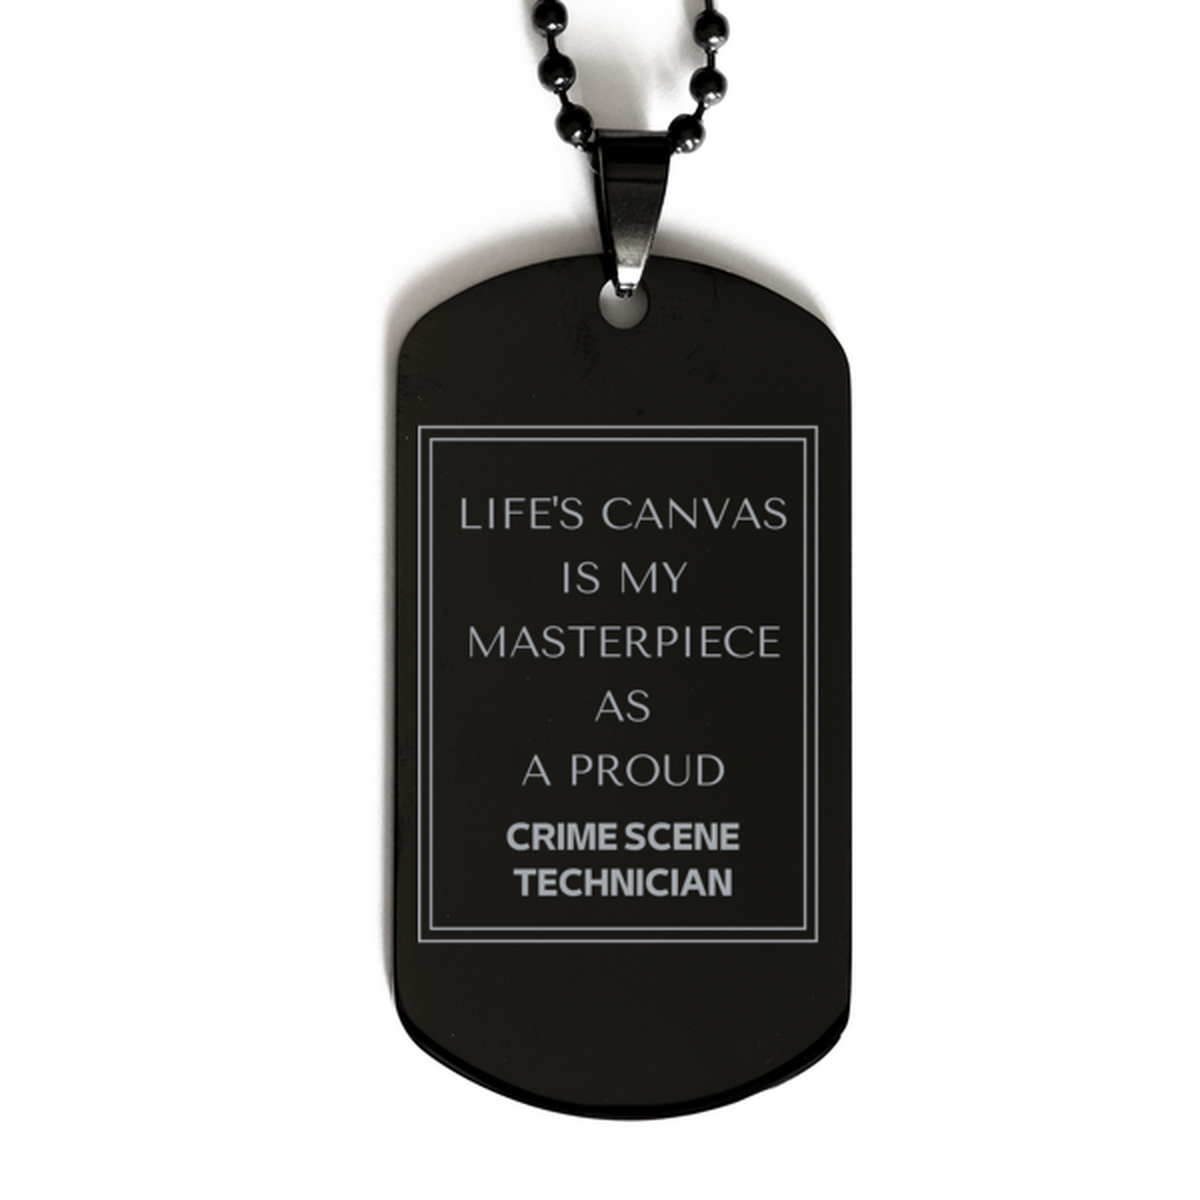 Proud Crime Scene Technician Gifts, Life's canvas is my masterpiece, Epic Birthday Christmas Unique Black Dog Tag For Crime Scene Technician, Coworkers, Men, Women, Friends